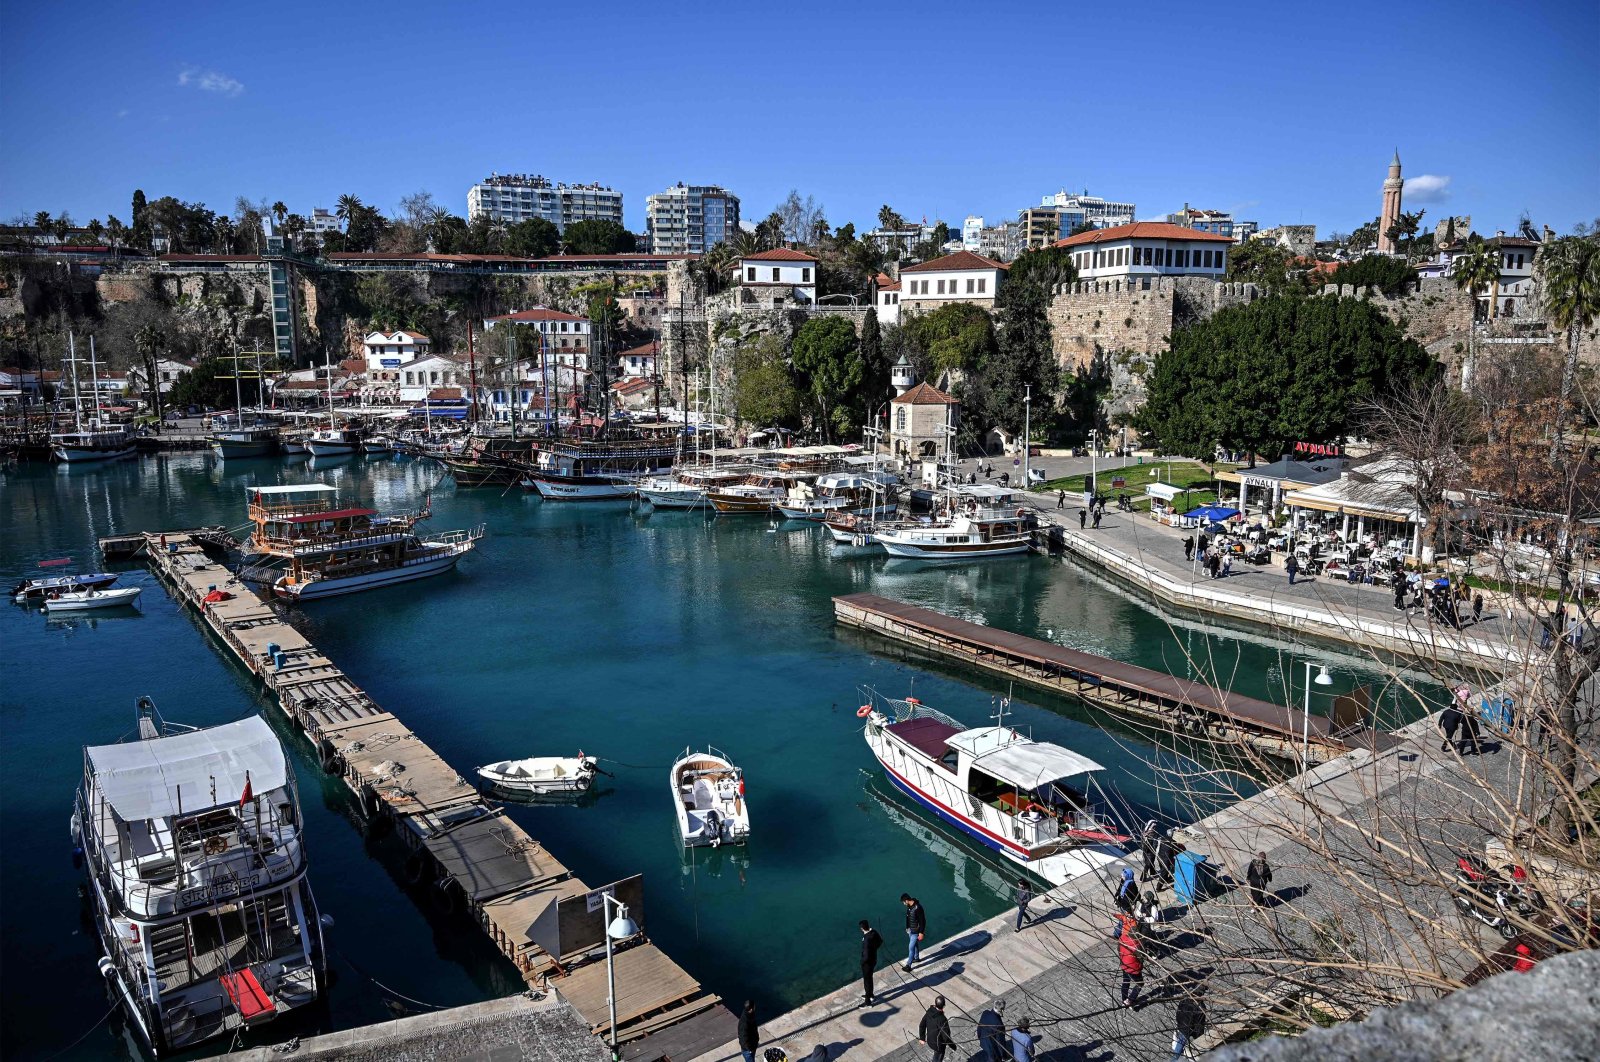 A general view of the Kaleiçi marina in Antalya, southern Turkey, March 12, 2022. (AFP Photo)